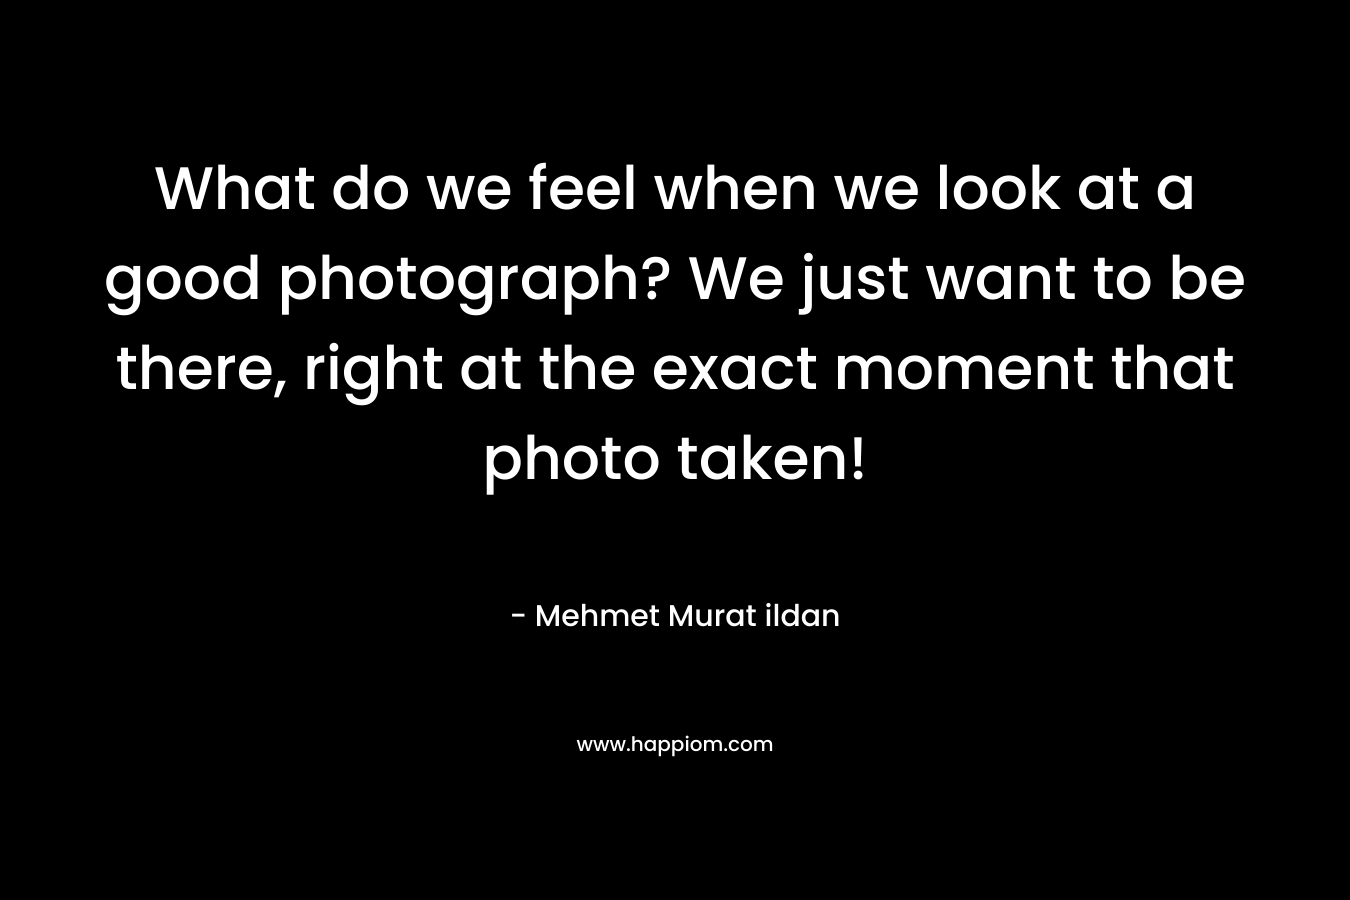 What do we feel when we look at a good photograph? We just want to be there, right at the exact moment that photo taken!